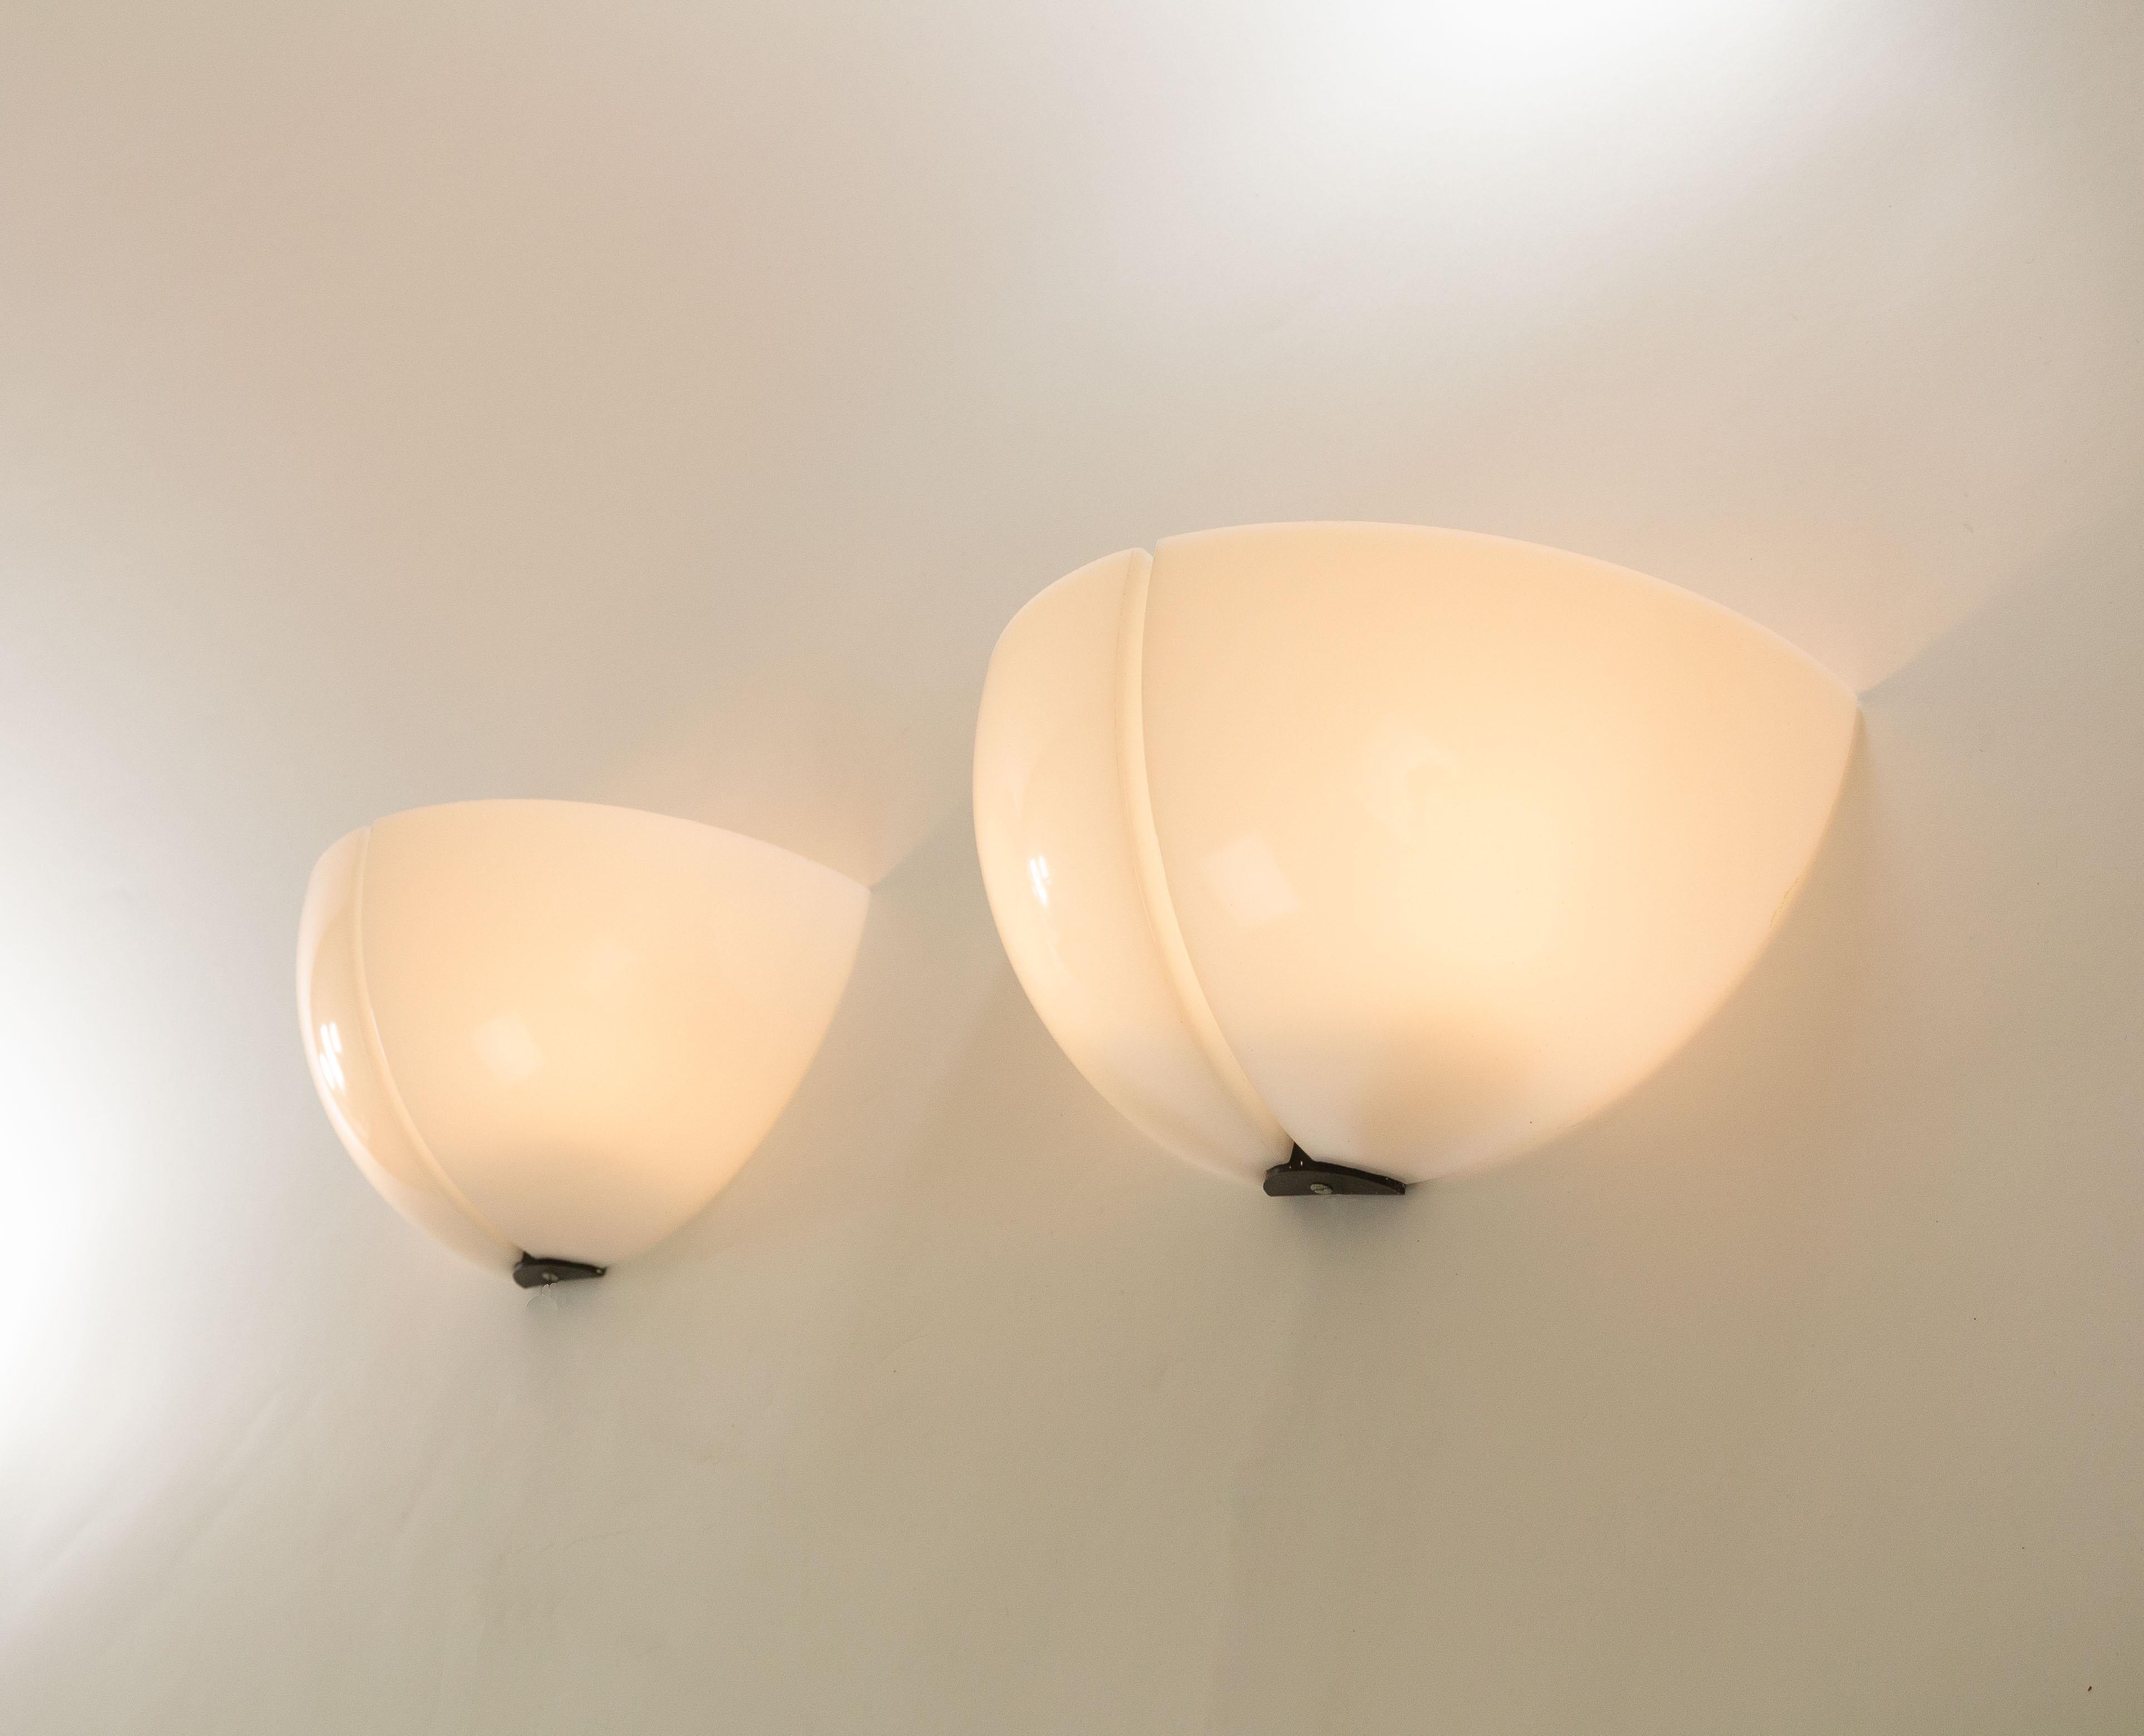 A pair of Spicchio wall lamps designed by Danilo and Corrado Aroldi and manufactured by Stilnovo in 1972.

Danilo and Corrado Aroldi designed a whole range of Spicchio lamps for Stilnovo. In our archive we found 3 different wall lamps, 2 pendants,